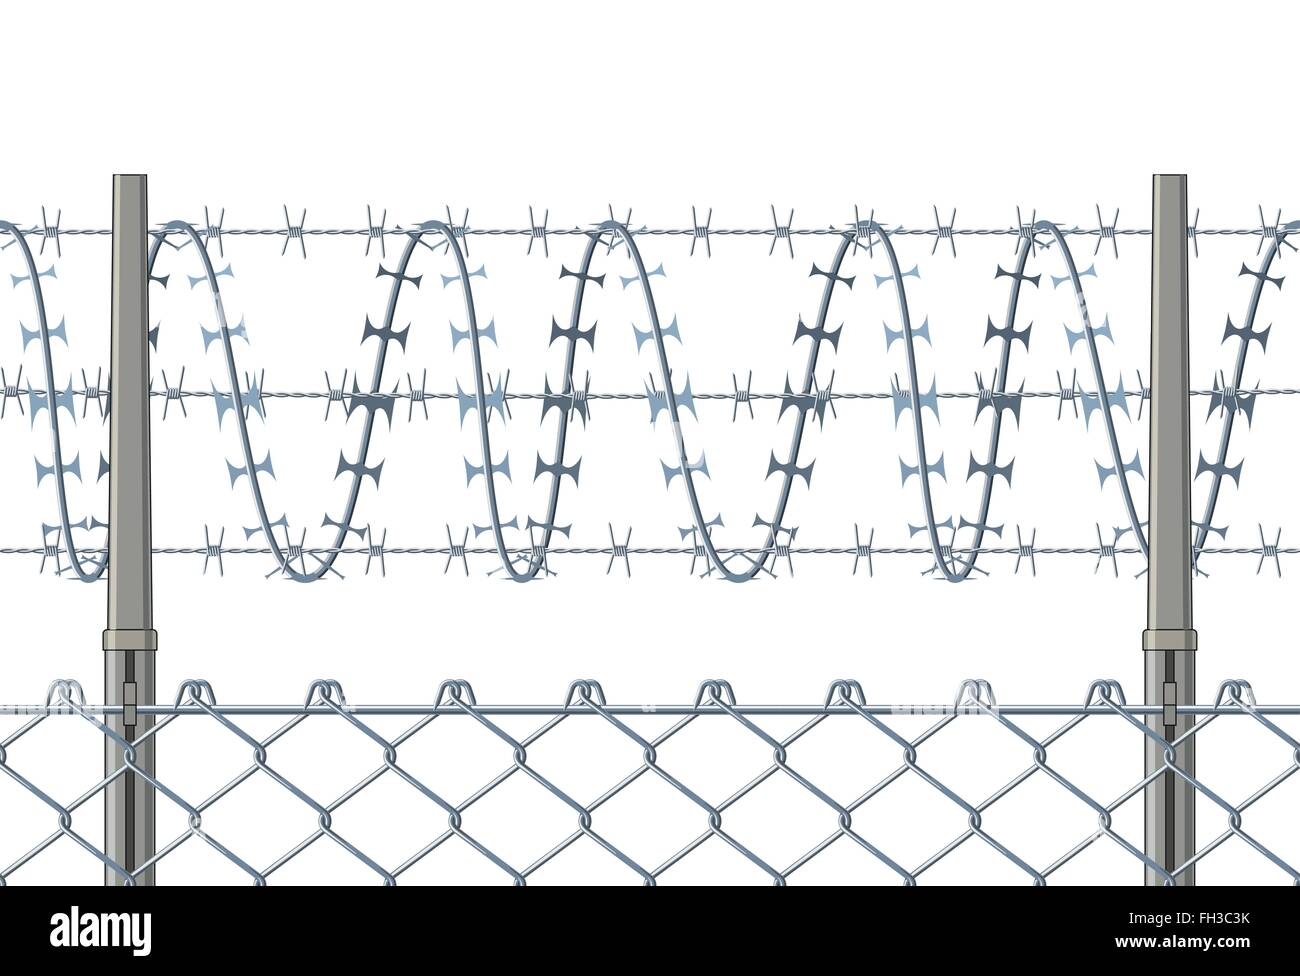 Highly detailed prison or refugee camp fence Stock Vector